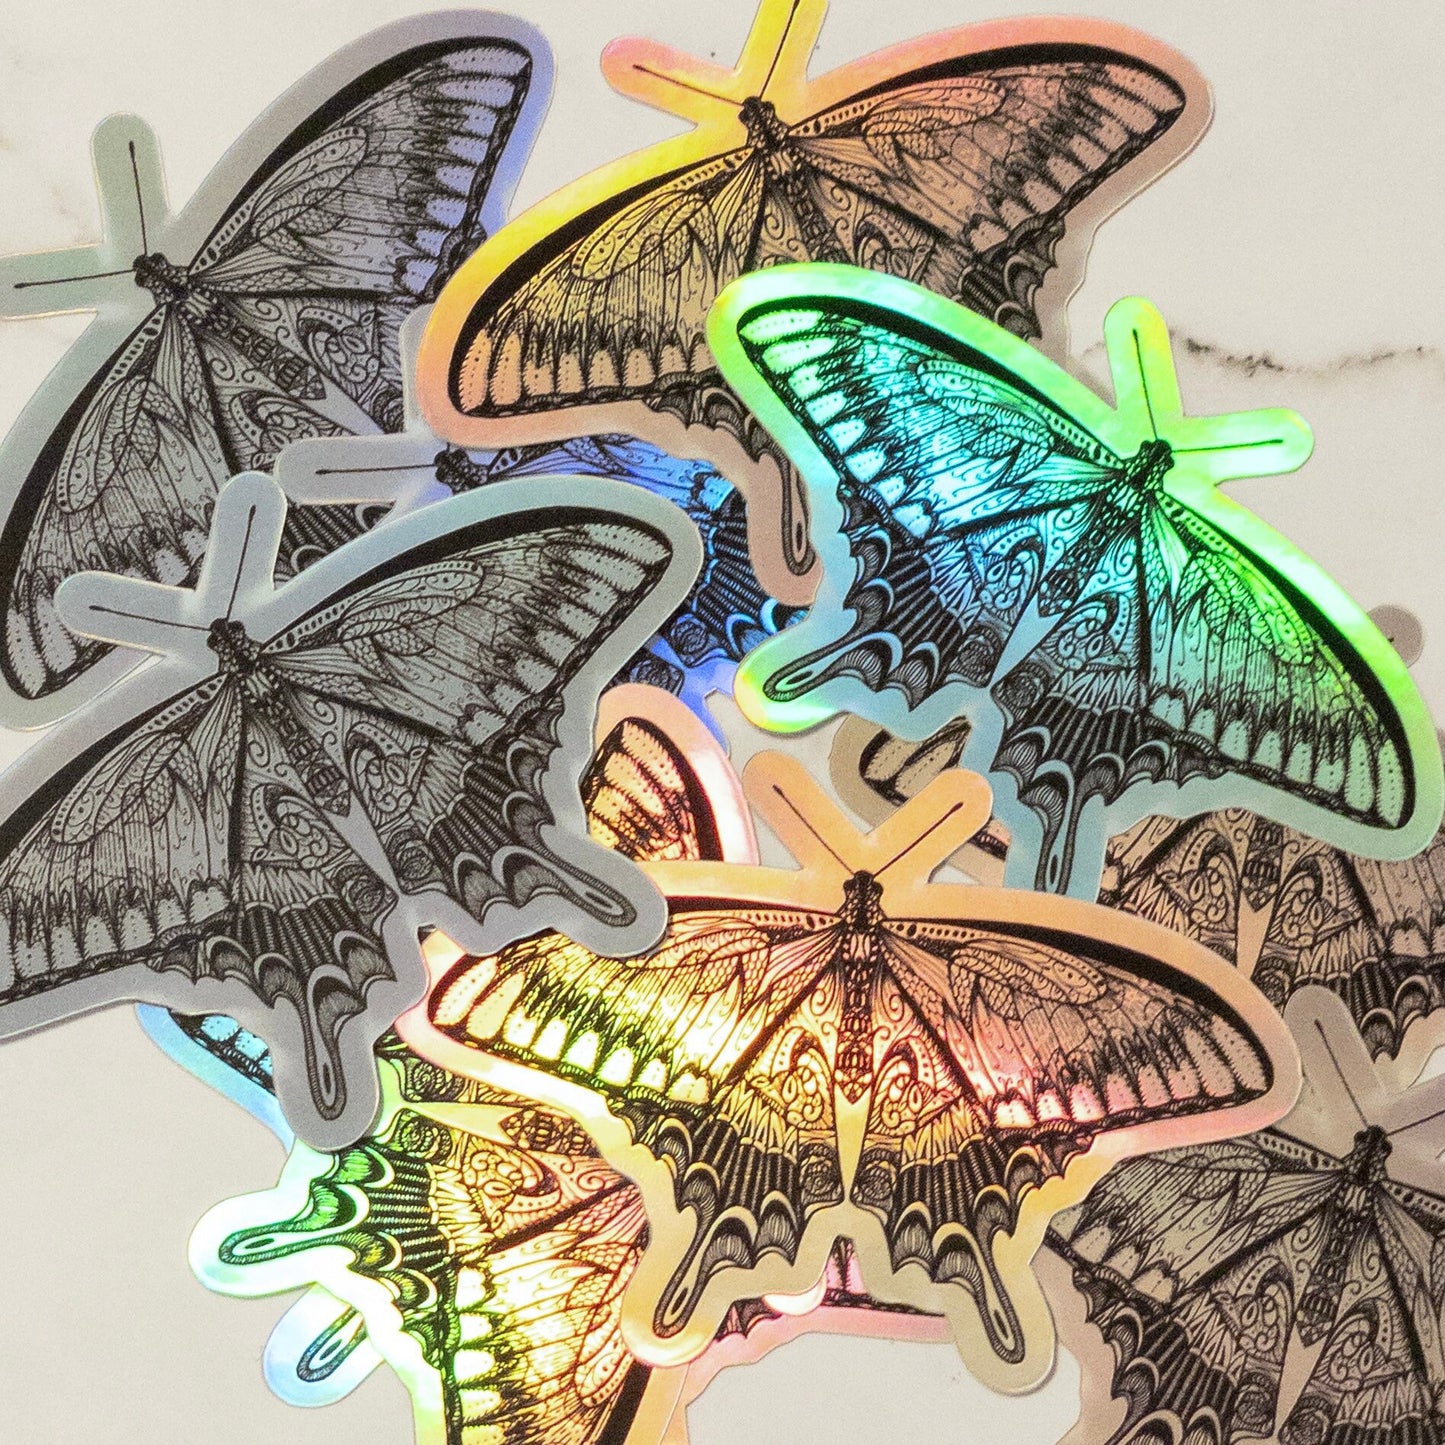 Butterfly Holographic Sticker 3 inch